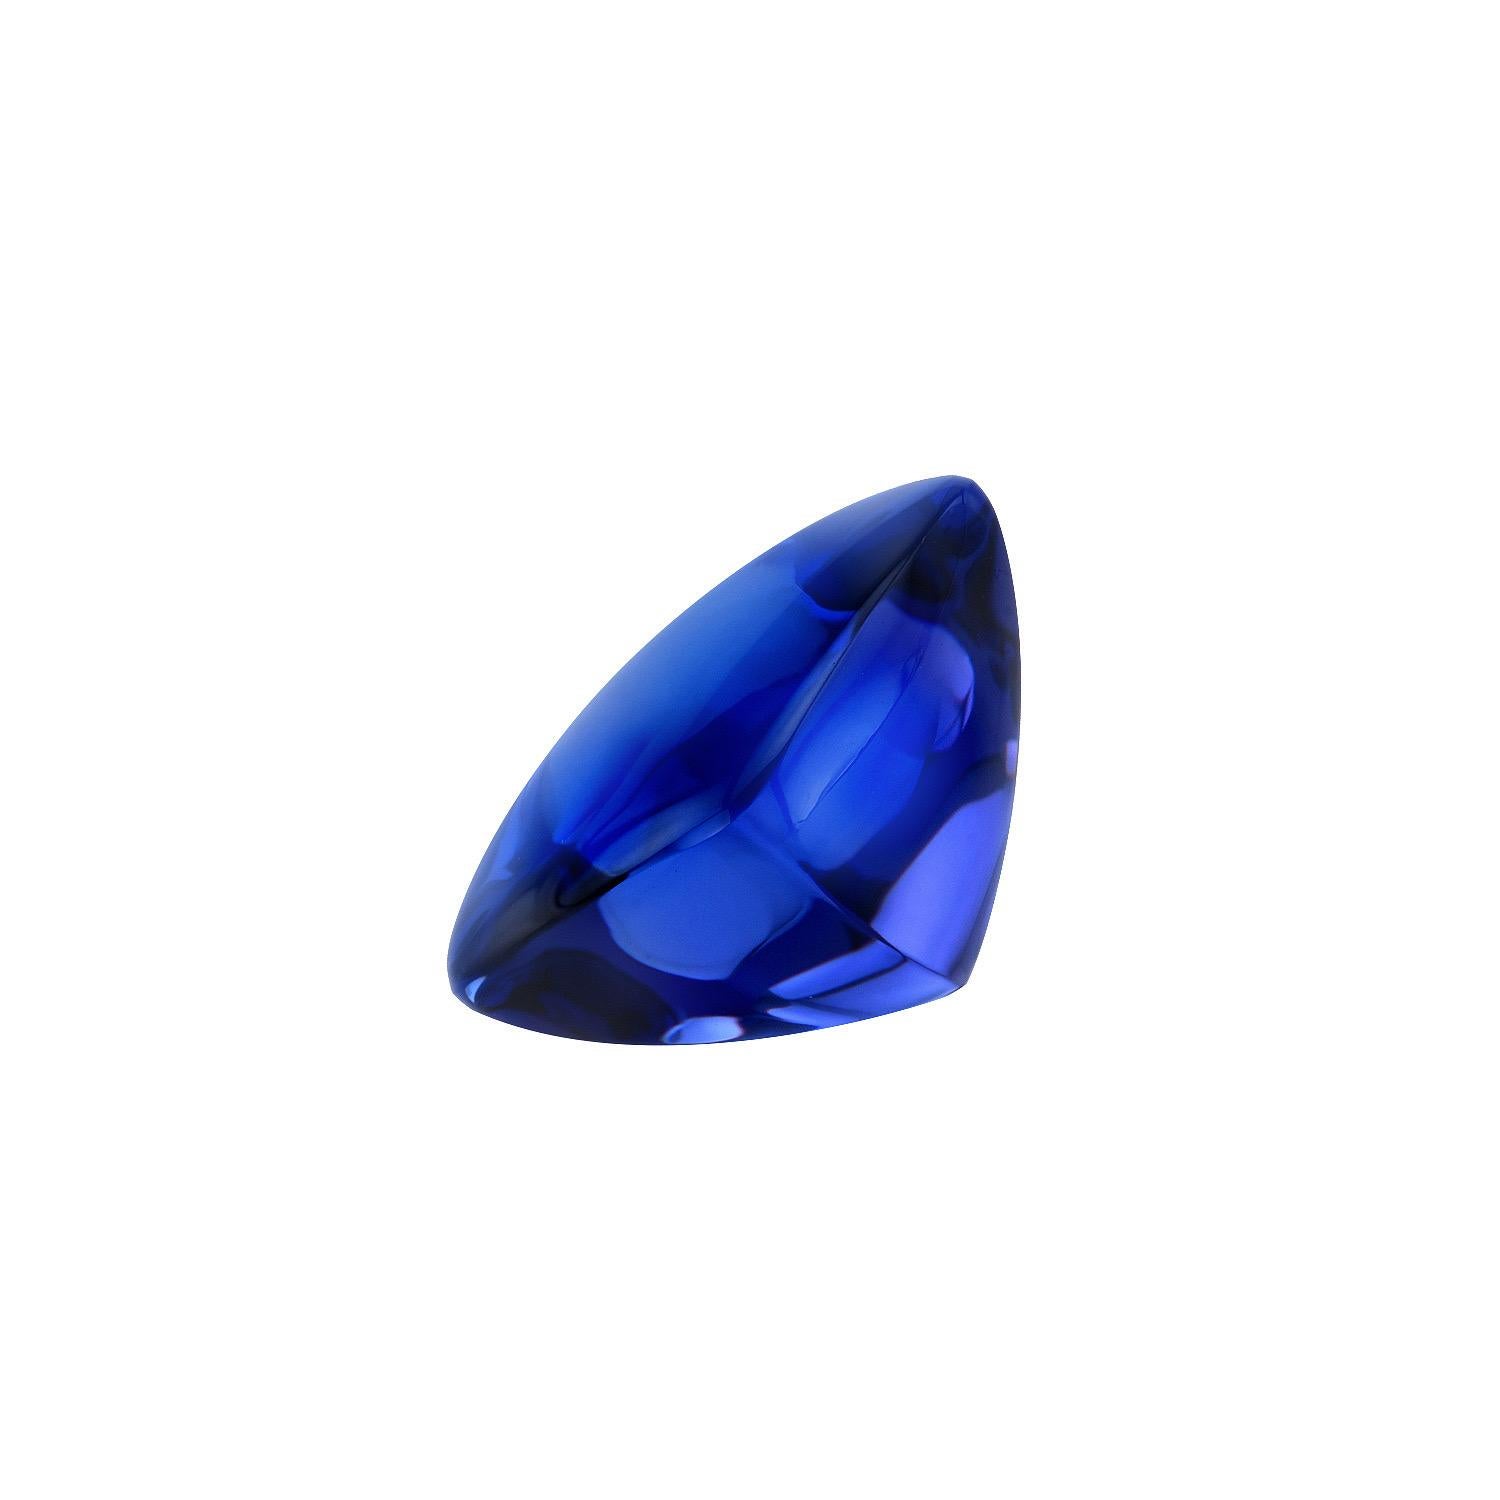 Marvelous 8.44 carat Tanzanite Sugarloaf Cabochon cushion loose gemstone, offered unmounted to a fine gemstone connoisseur.
Dimensions: 11.1 x 11.1 mm.
Returns are accepted and paid by us within 7 days of delivery.
We offer supreme custom jewelry